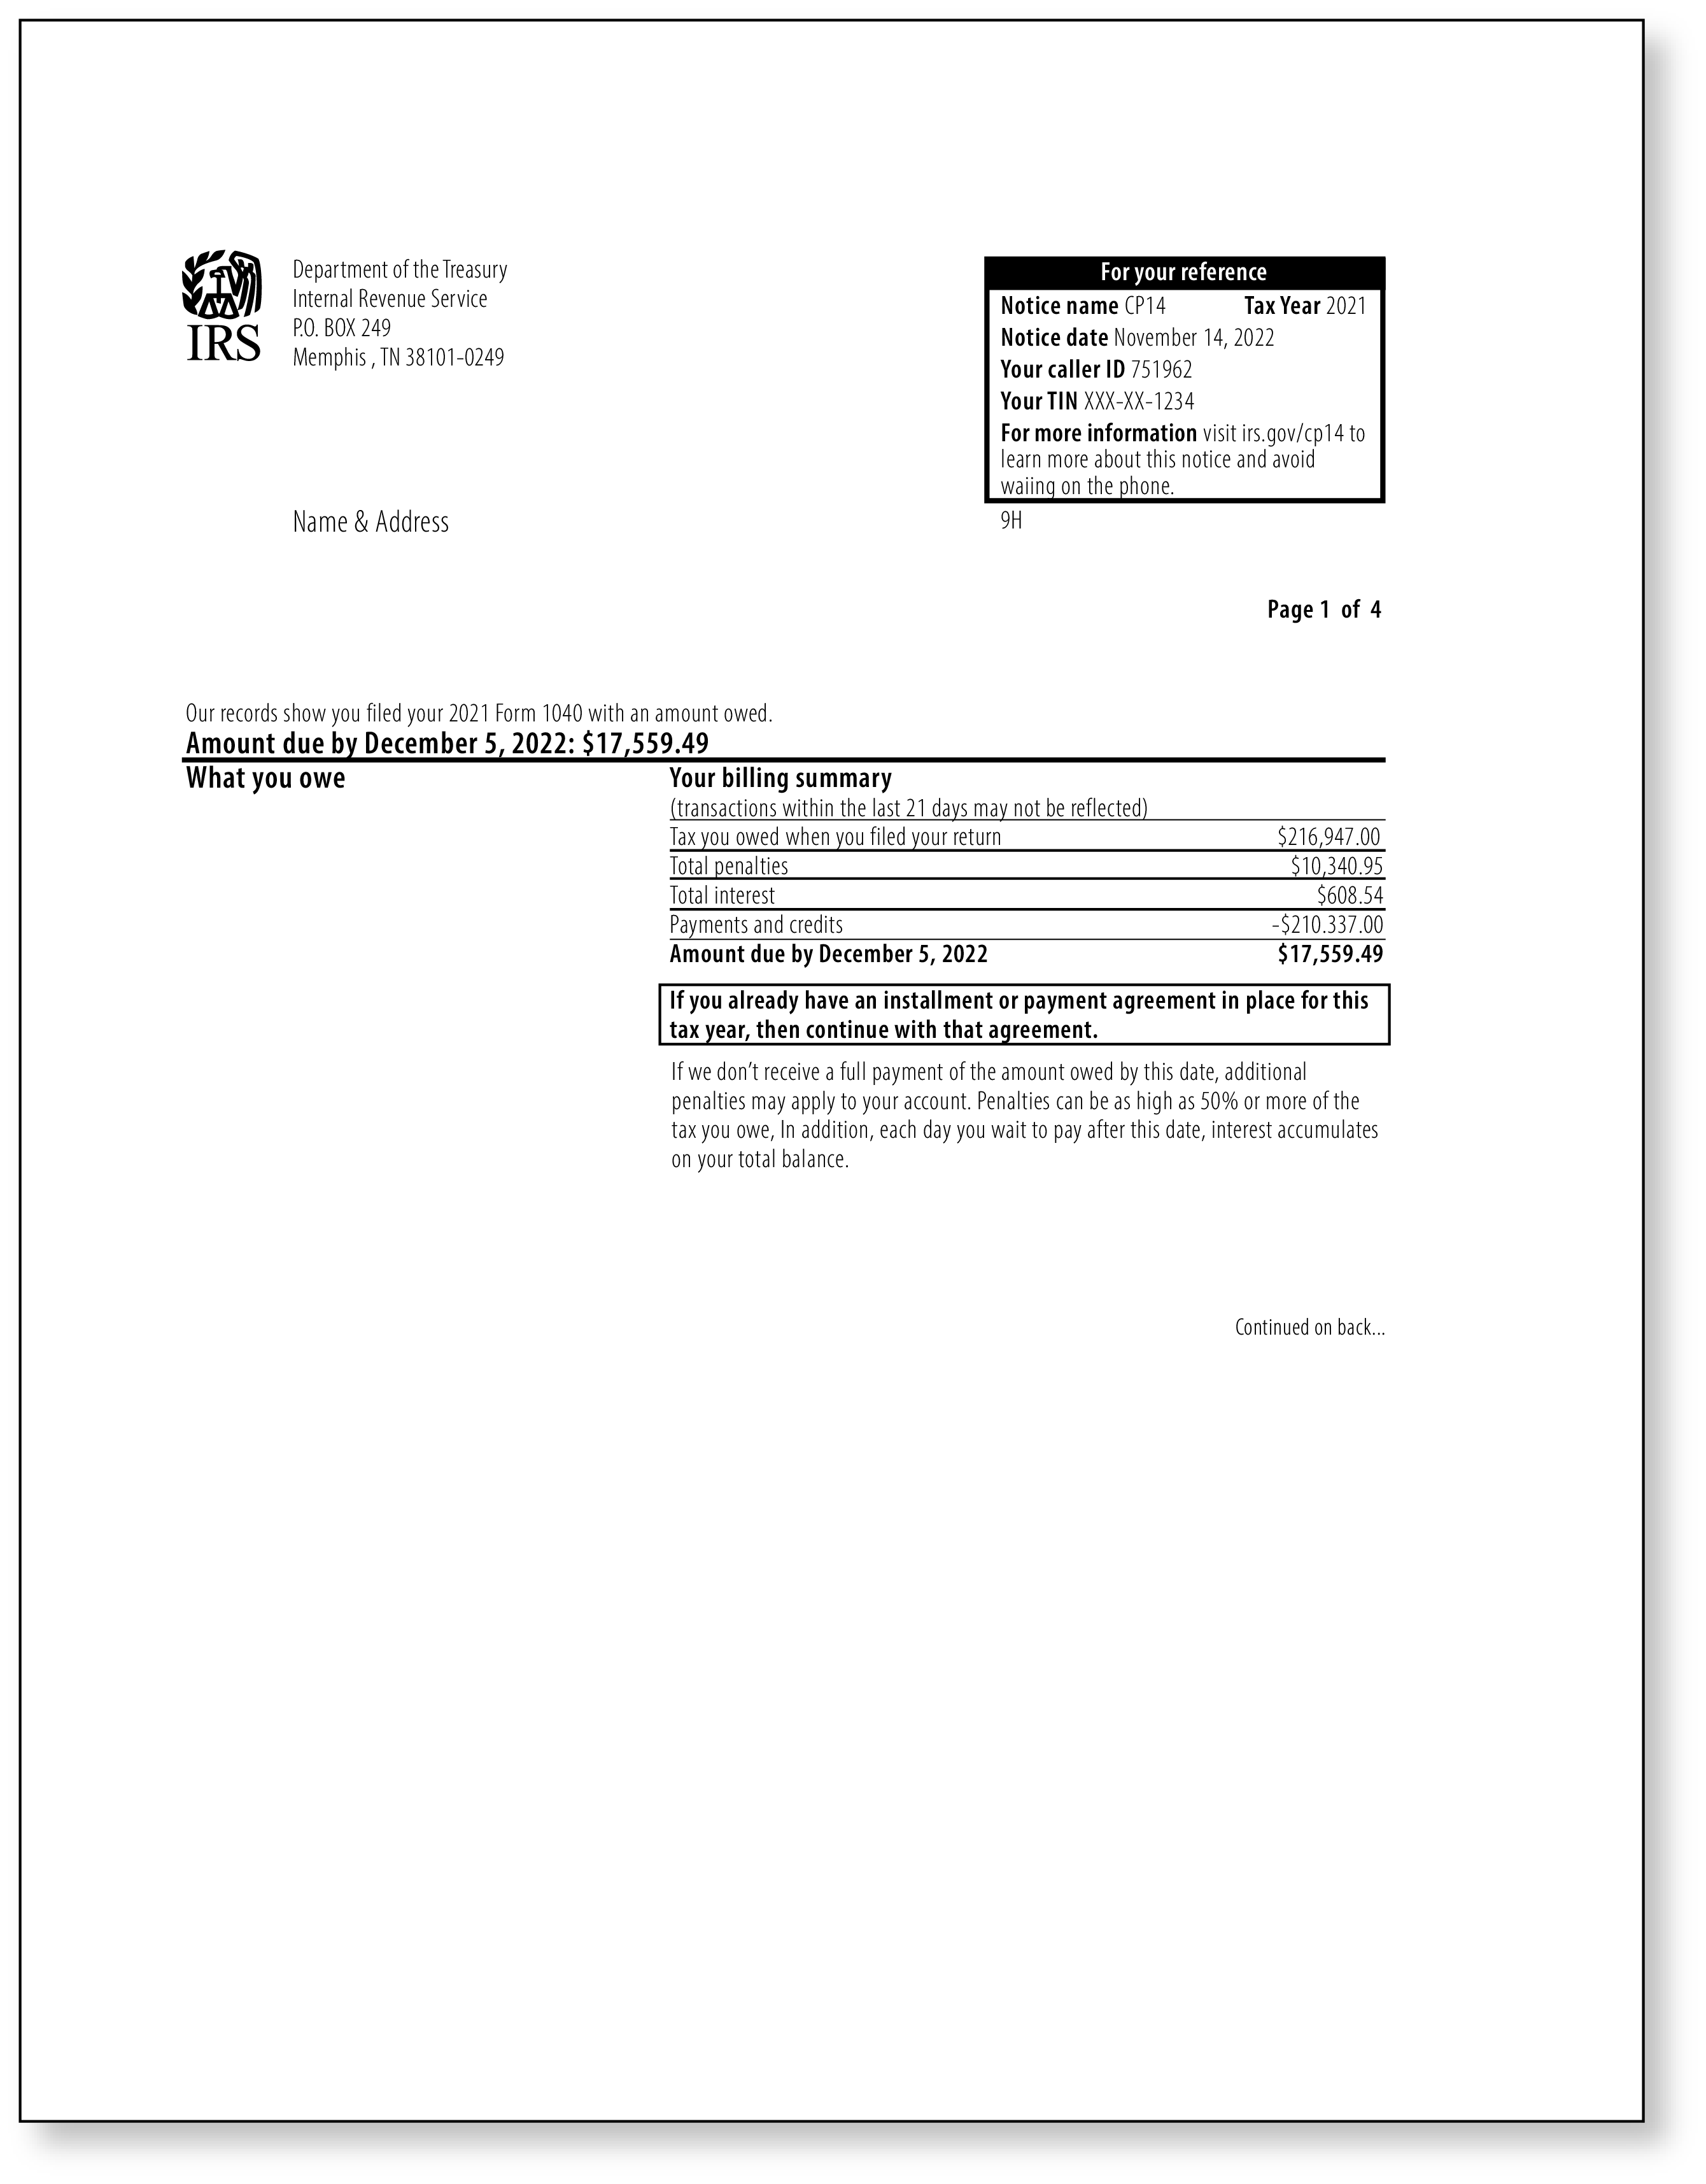 IRS Audit Letter CP14 – Sample 1